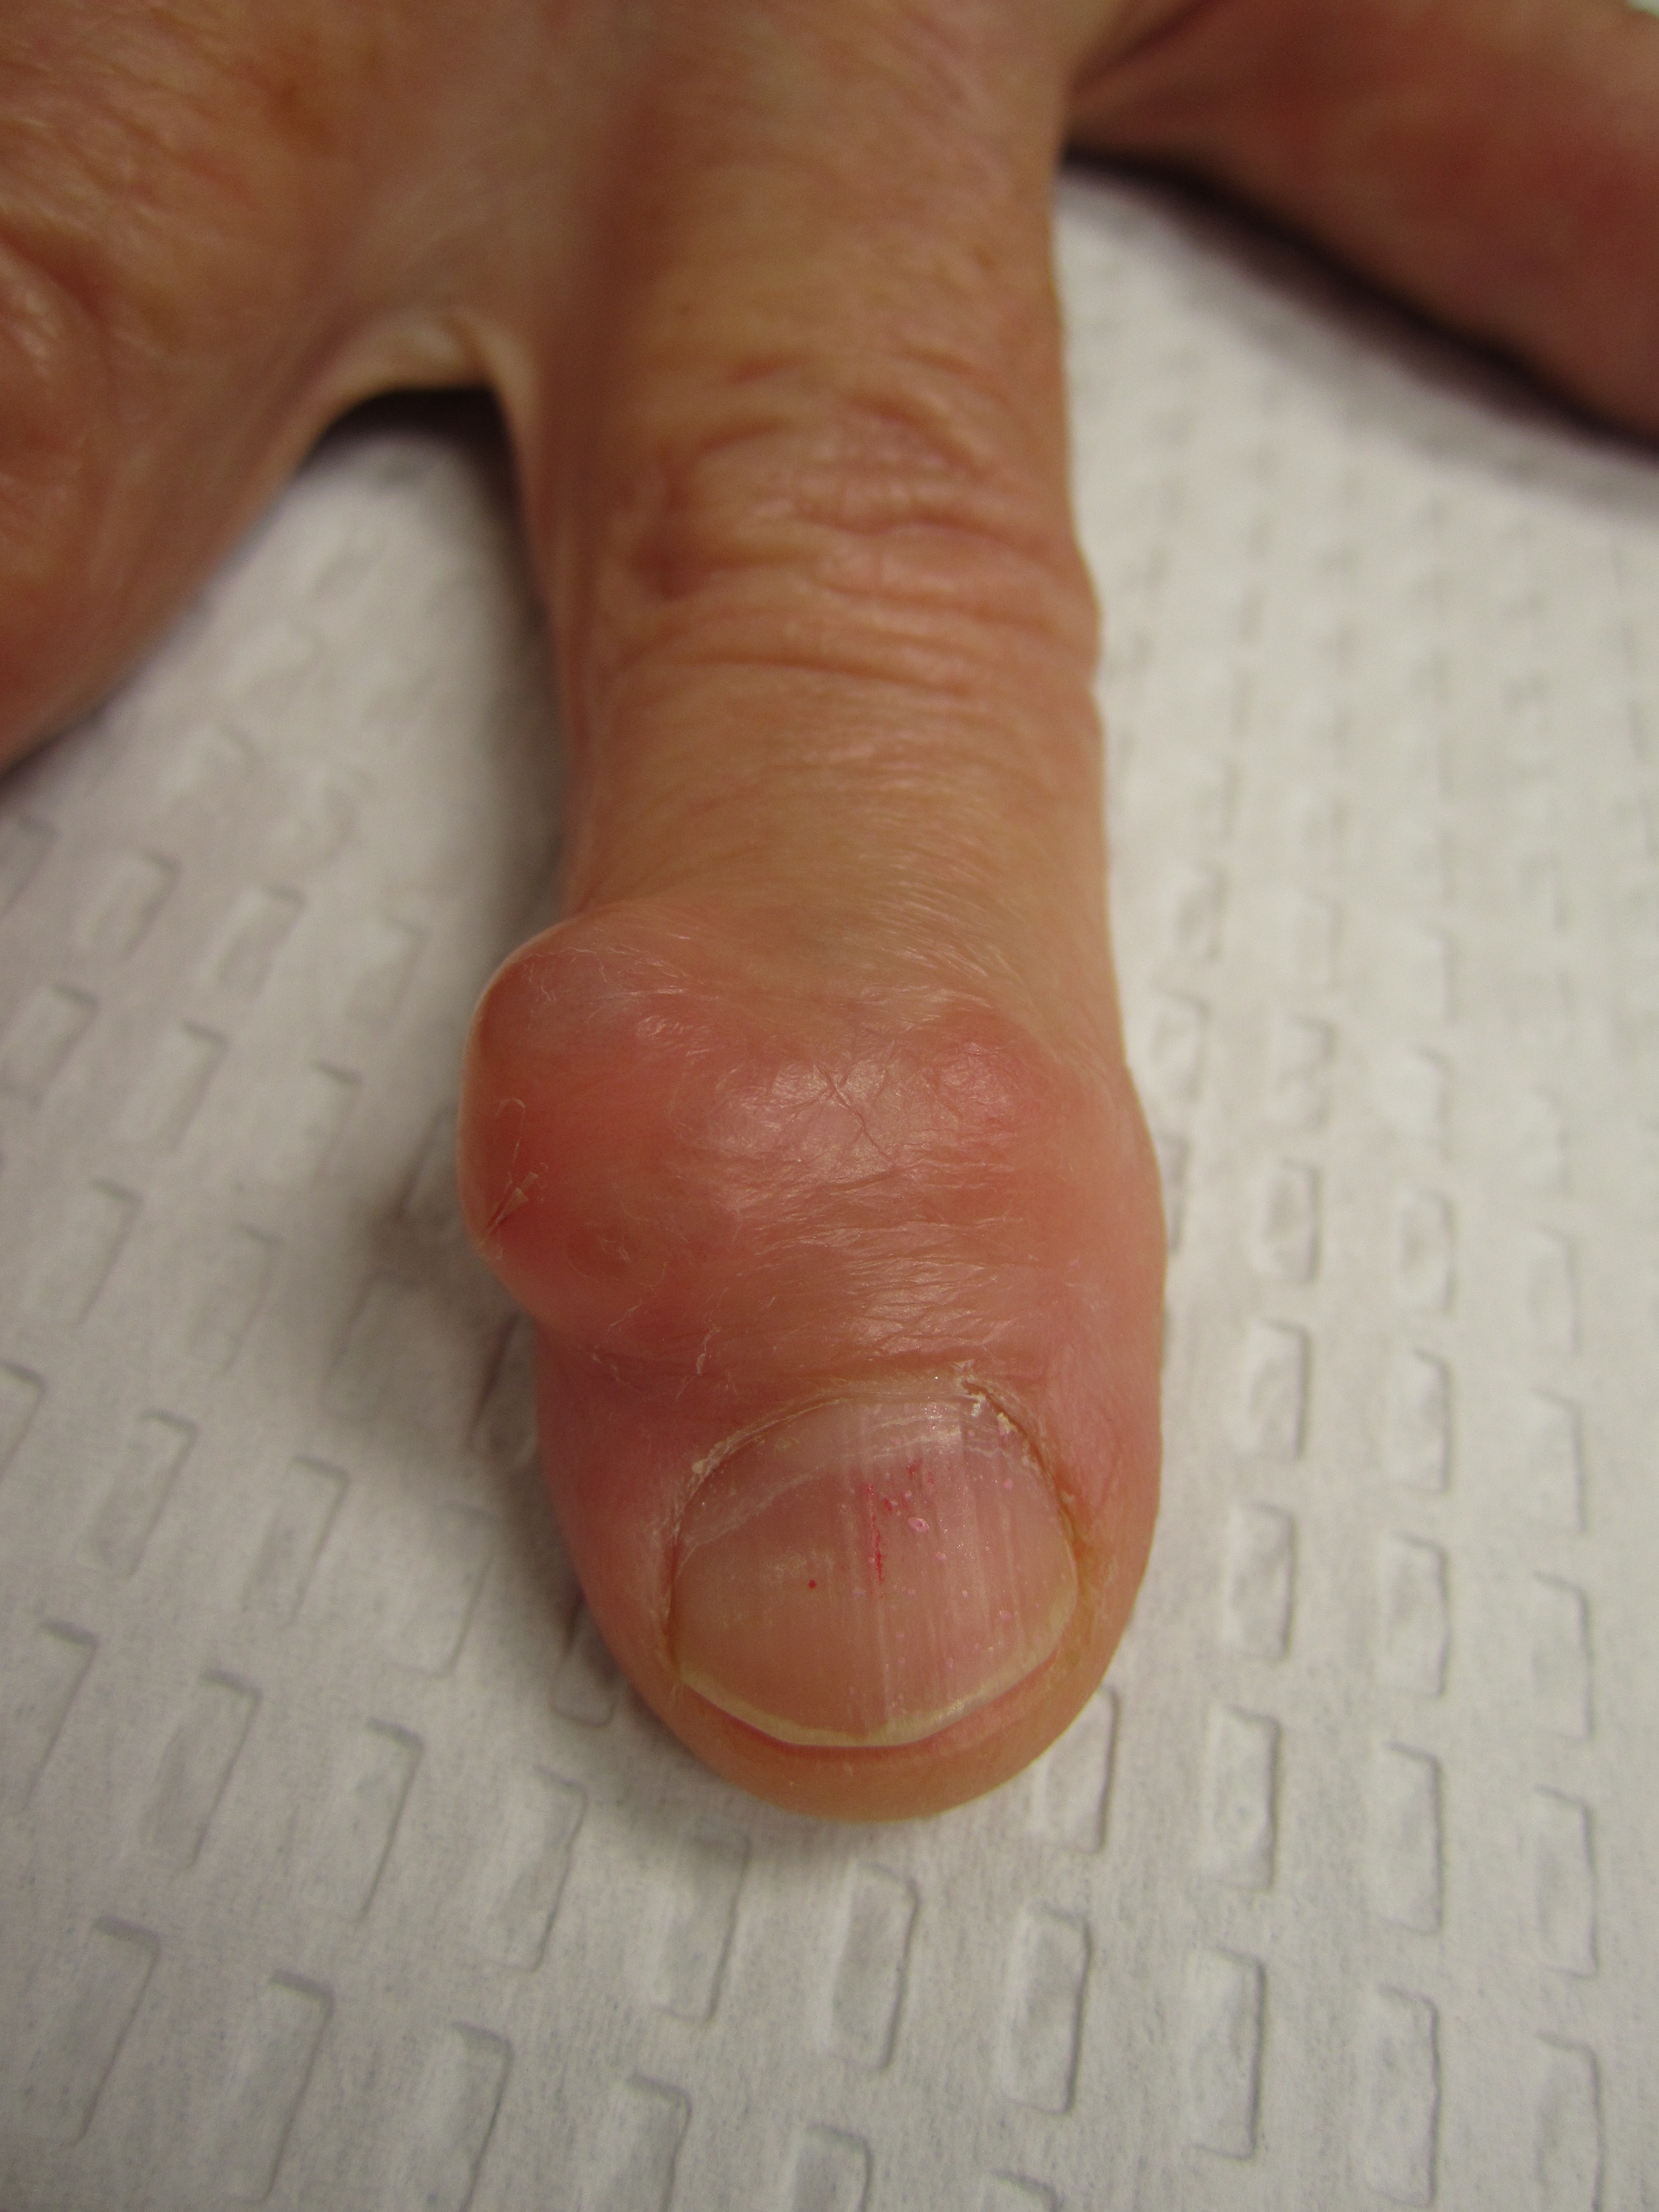 Sticky fingers: what to do about trigger finger and mallet finger - The  Portland Clinic